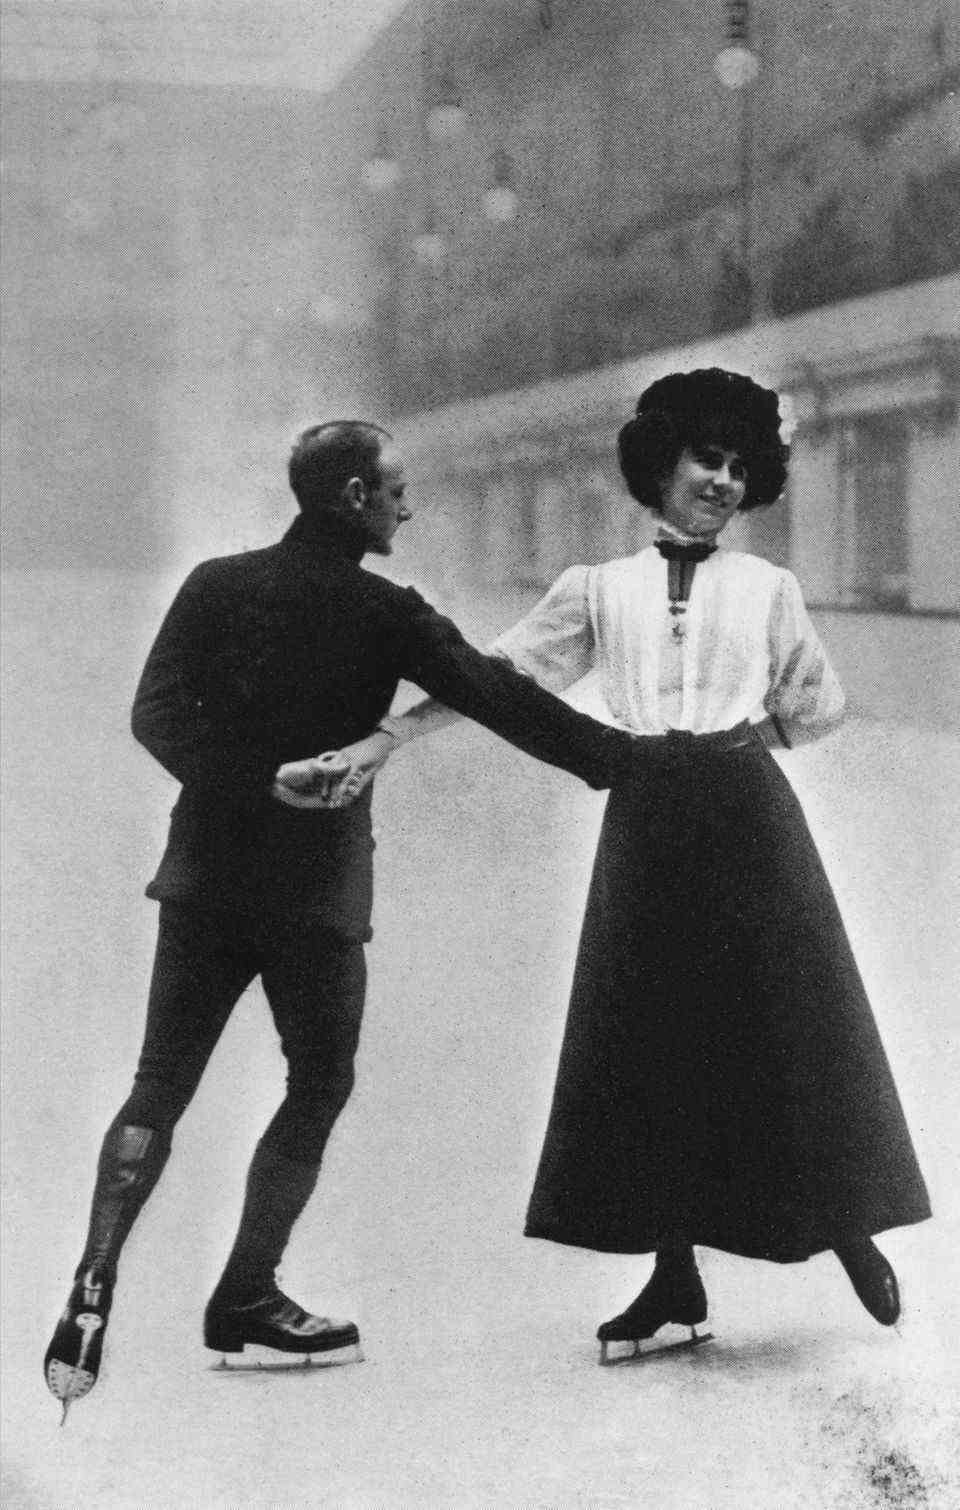 There were no Winter Games in 1908, but some winter disciplines were introduced that year for the first time.  However, the games had to be moved to London at short notice because an eruption of Mount Vesuvius made it impossible to hold them in Rome.  The Brits Phyllis Johnson and James H. Johnson won silver in pair skating.